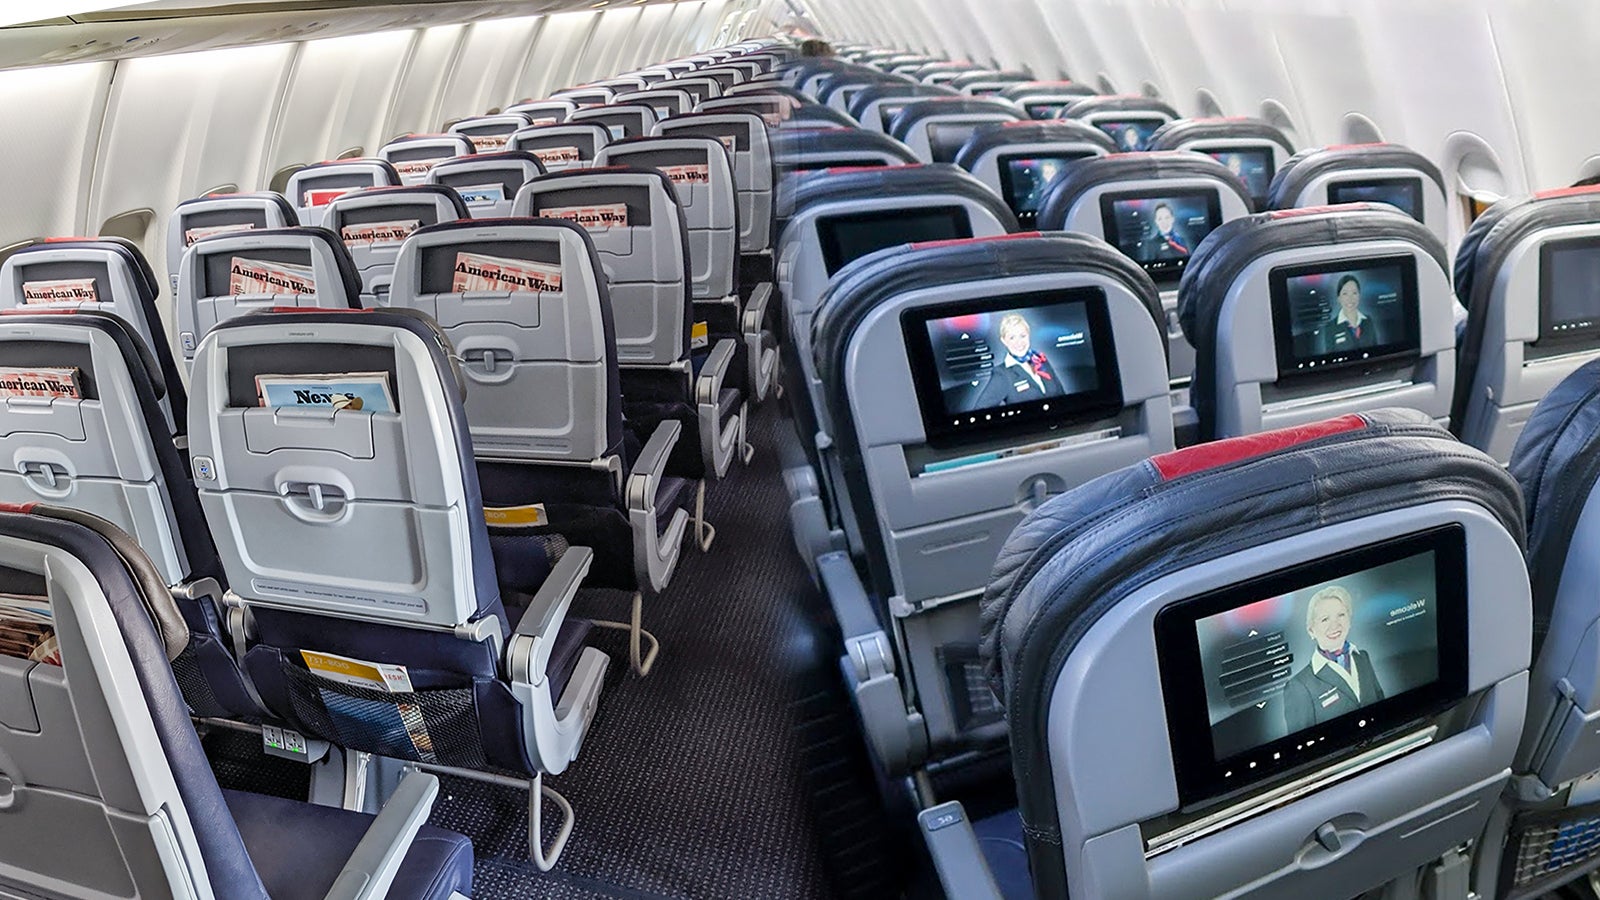 American Airlines 737-800 Cabin Upgrades Nearly Complete | Aviation Week  Network